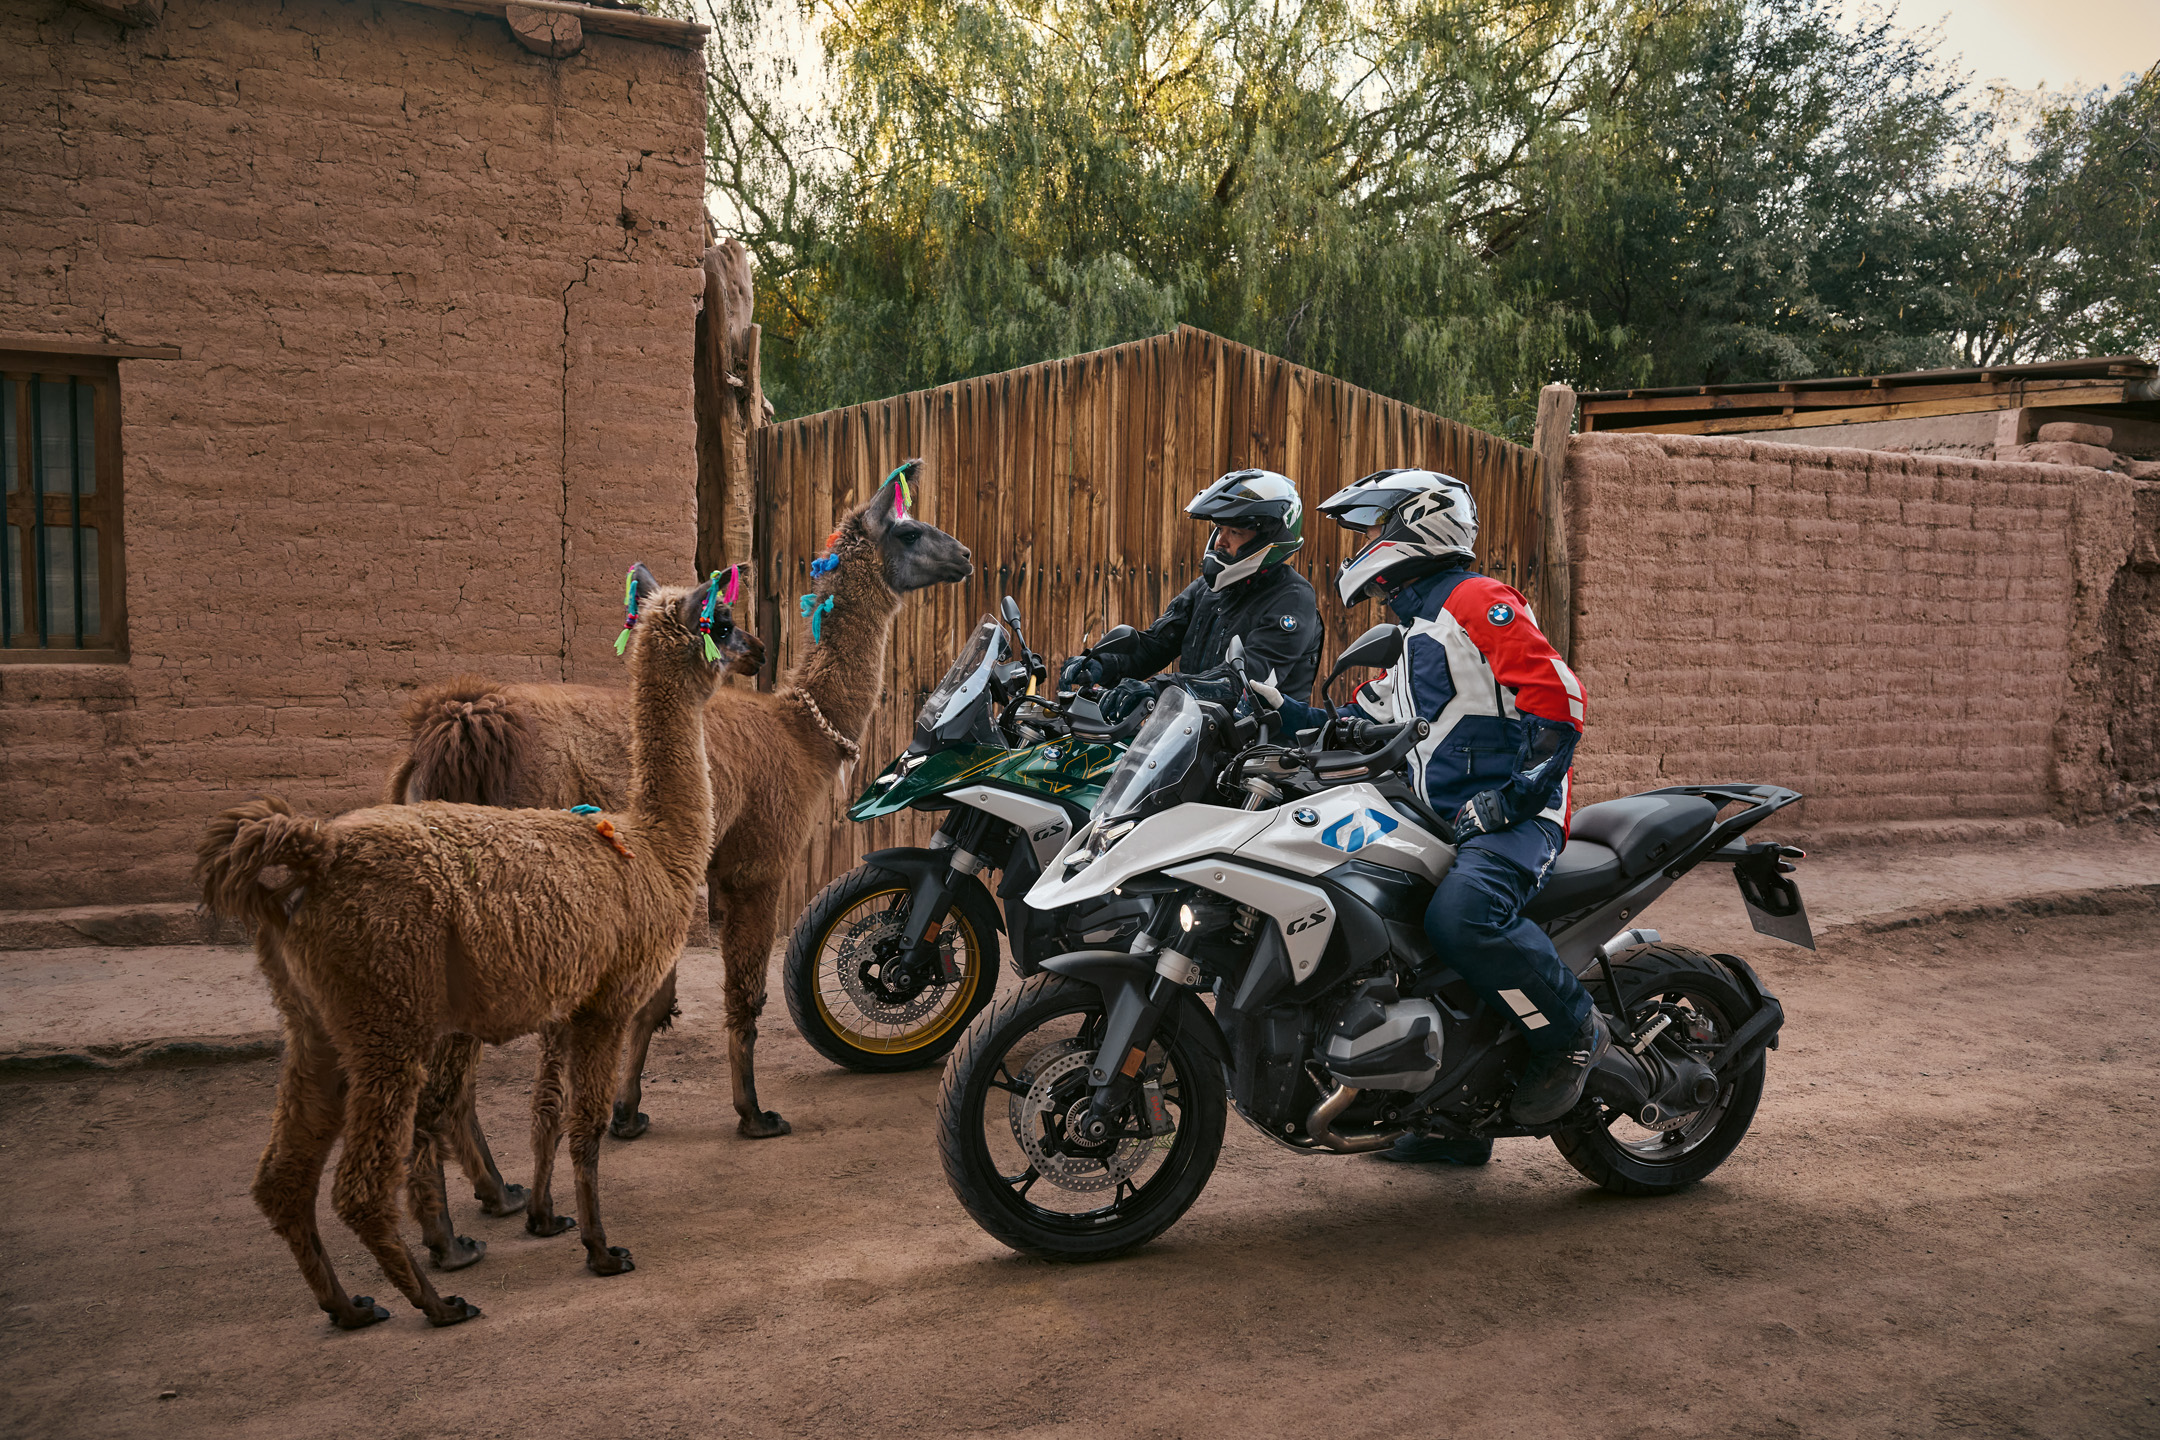 Two BMW R 1300 GS motorcycles meeting the local alpaccas, or llamas